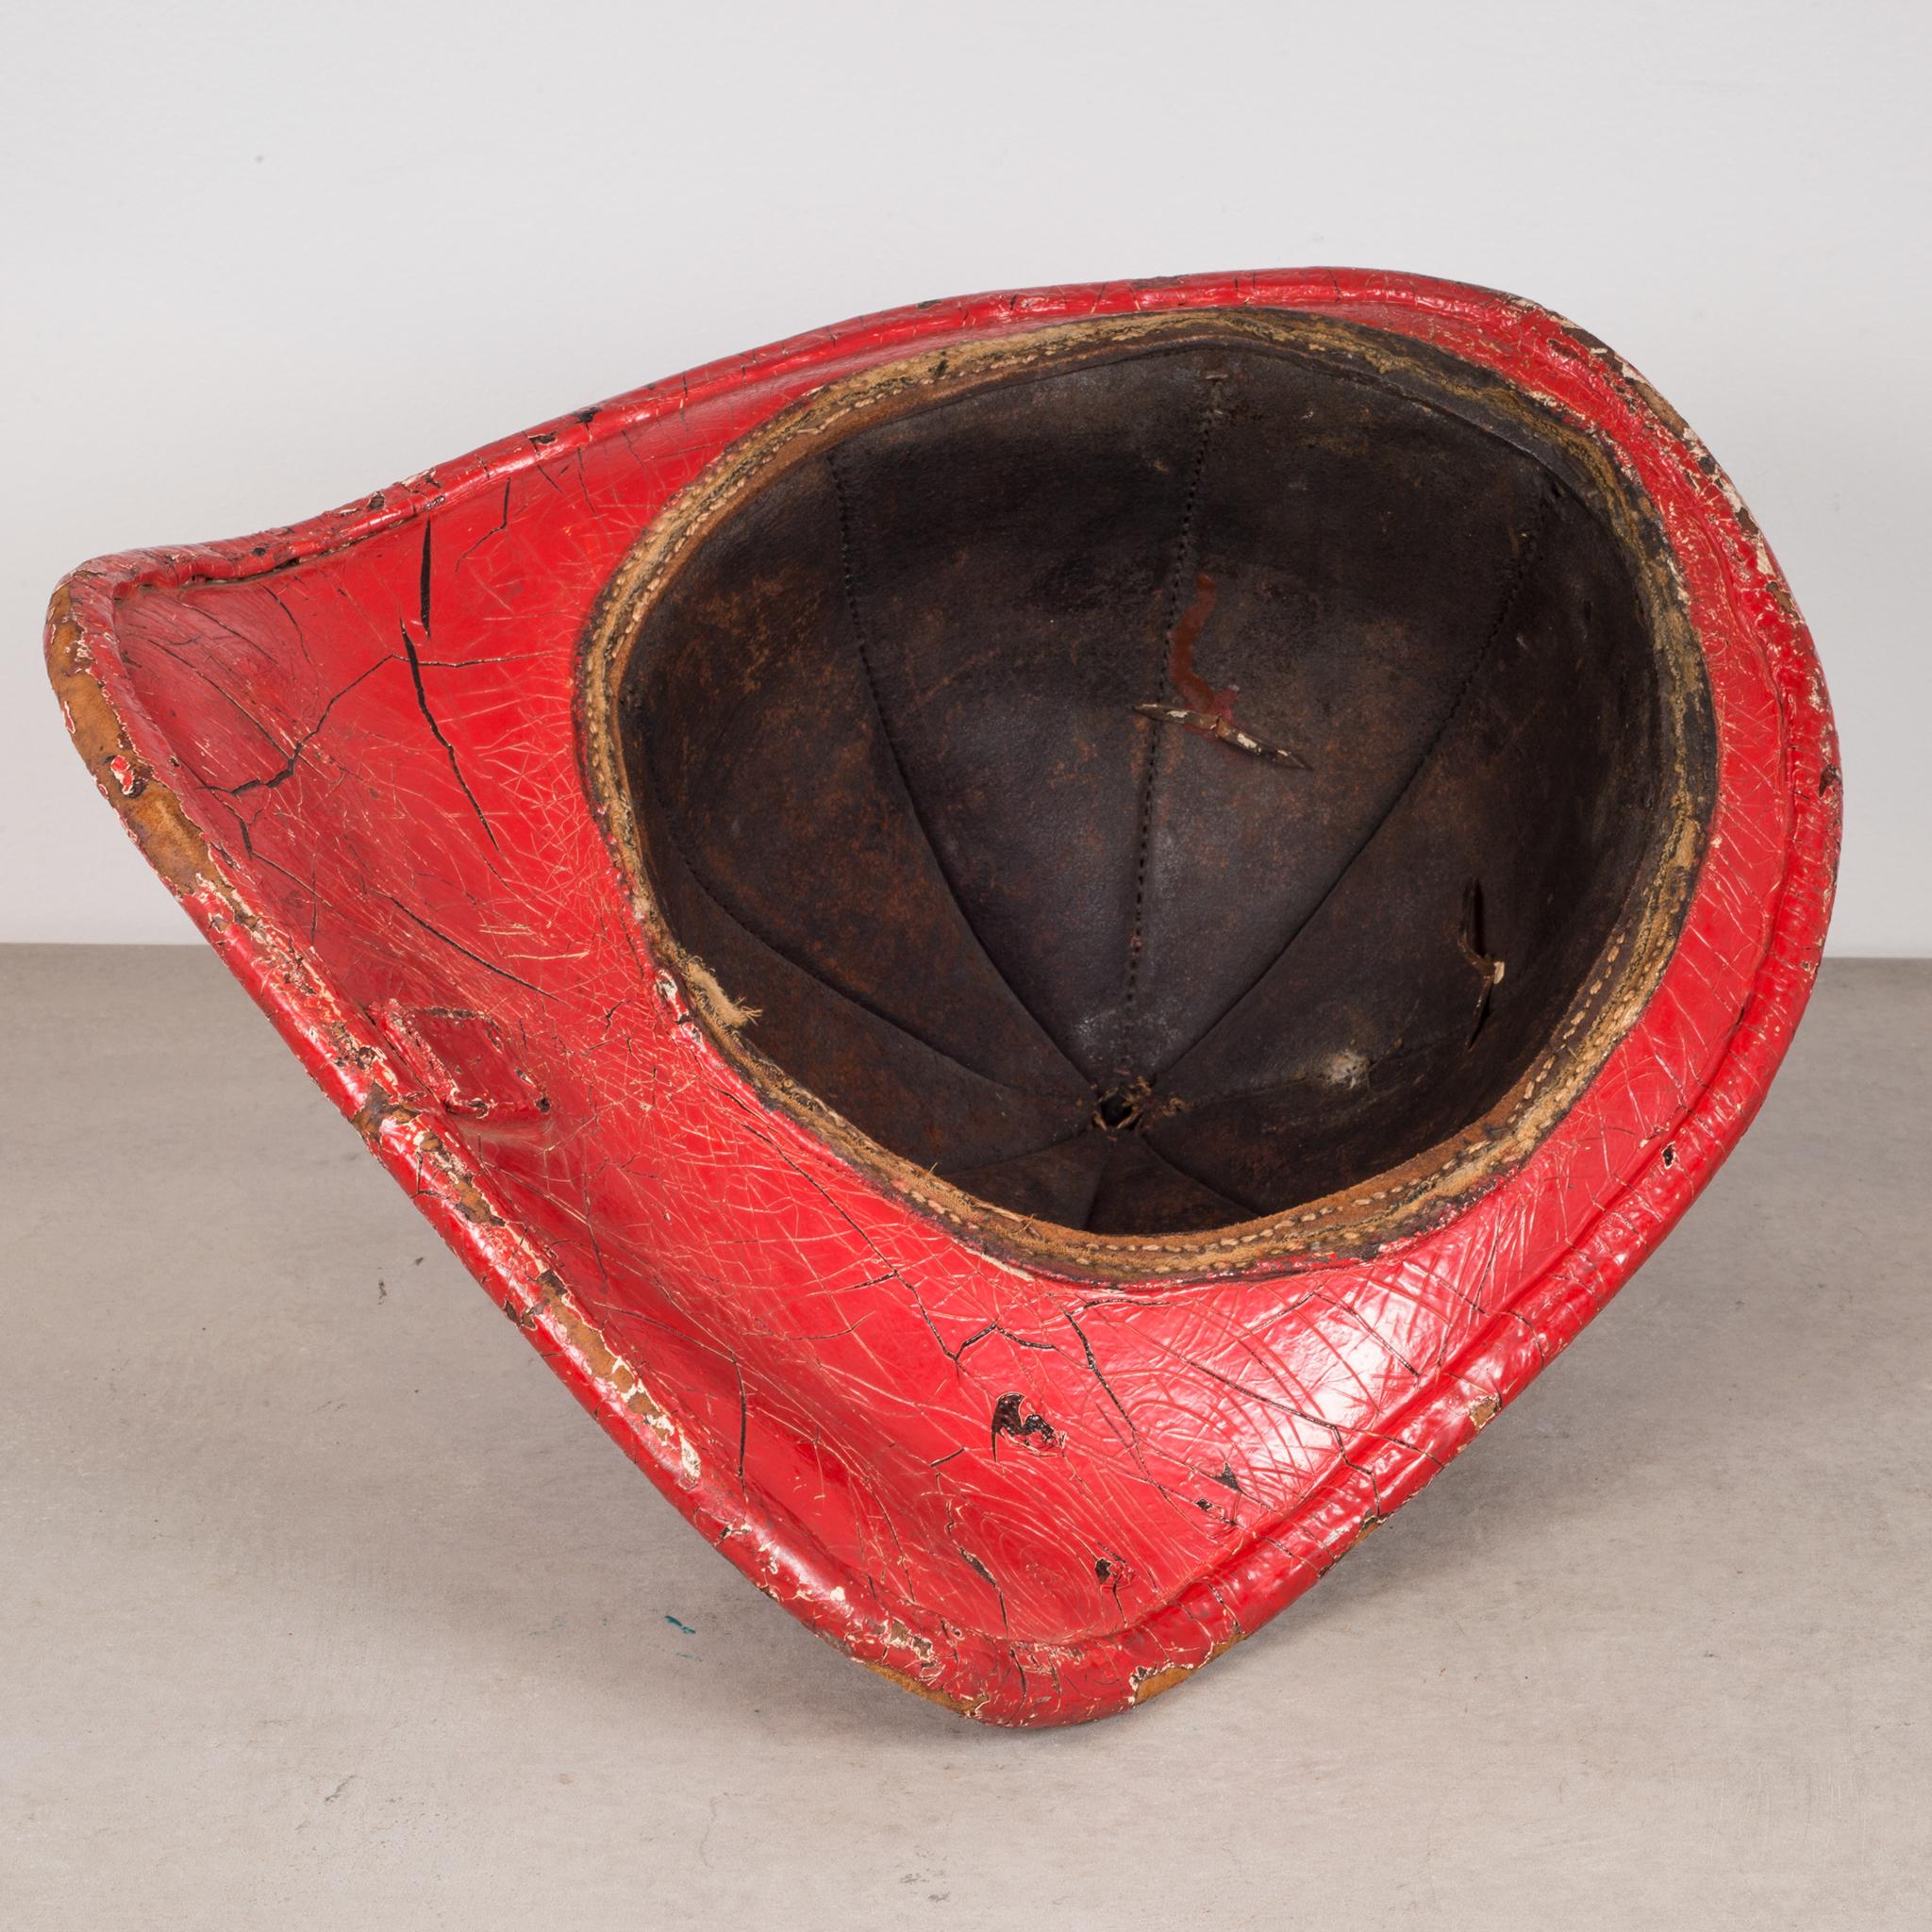 Industrial 19th Century Red Leather Fireman's Helmet with High Eagle, circa 1800s